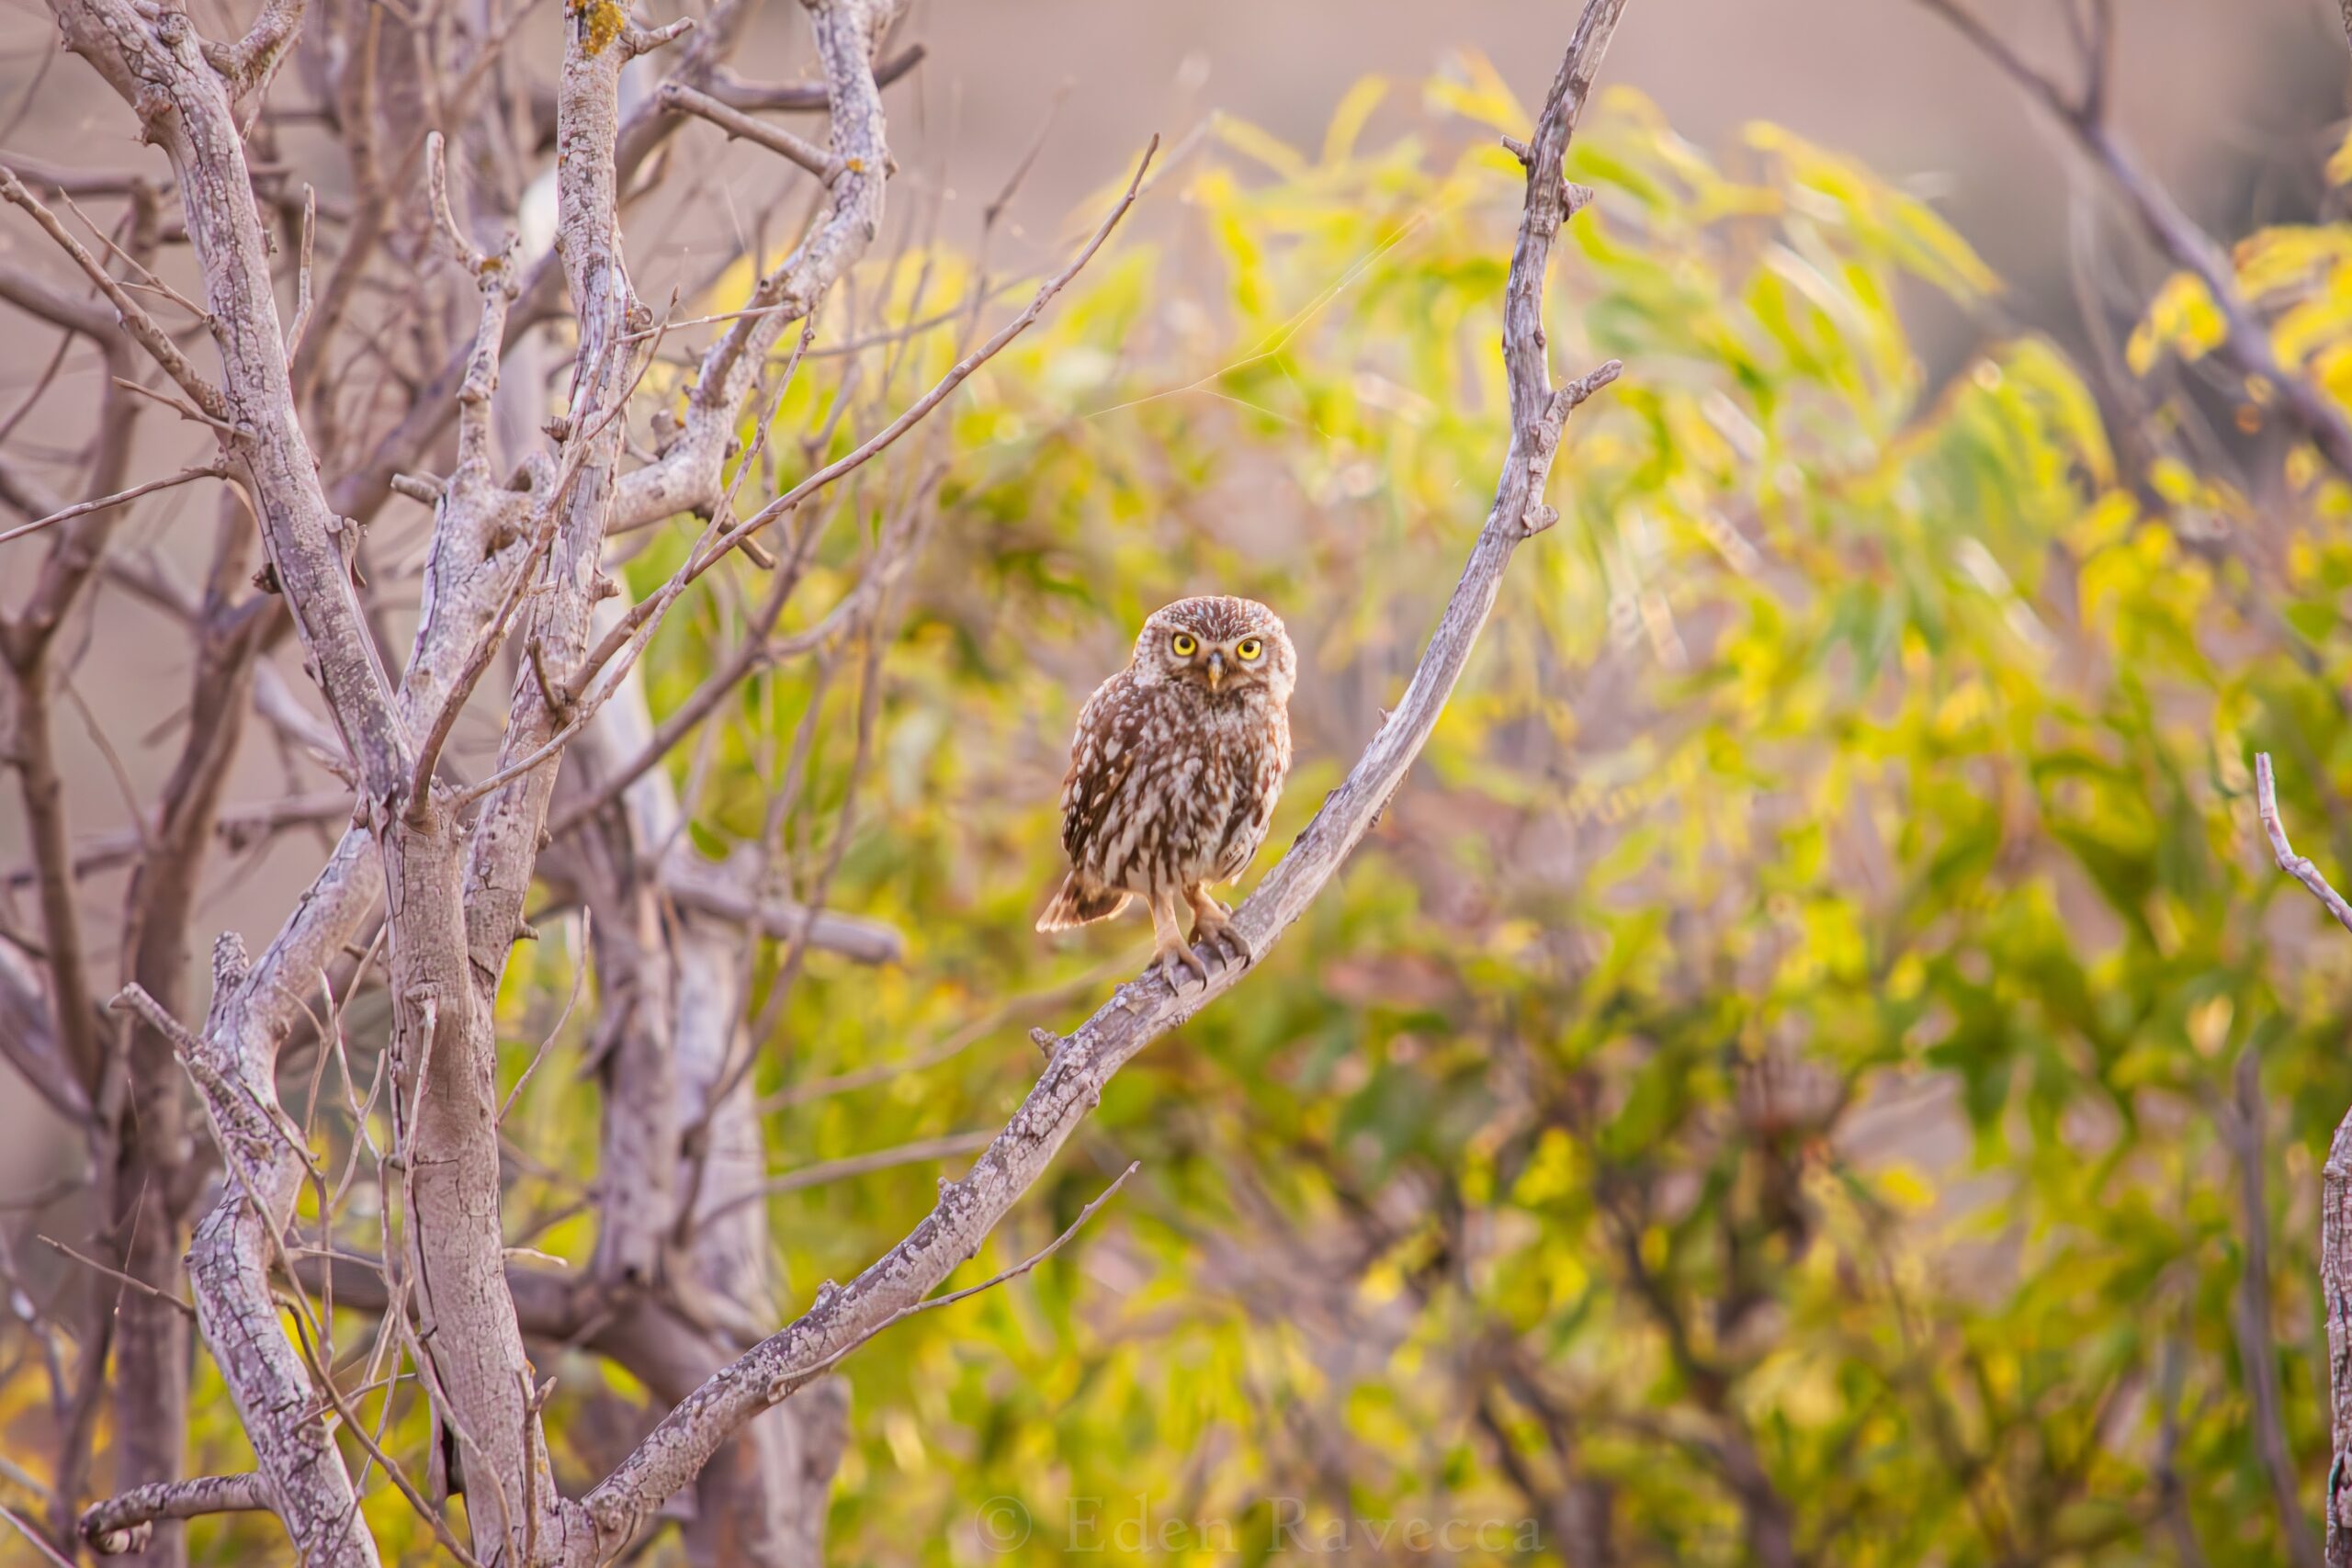 a tiny brown owl with long legs and intense yellow eyes stares at the camera. it's surrounded by dry scrubby looking vegetation. It looks quite similar to a North American Burrowing Owl.